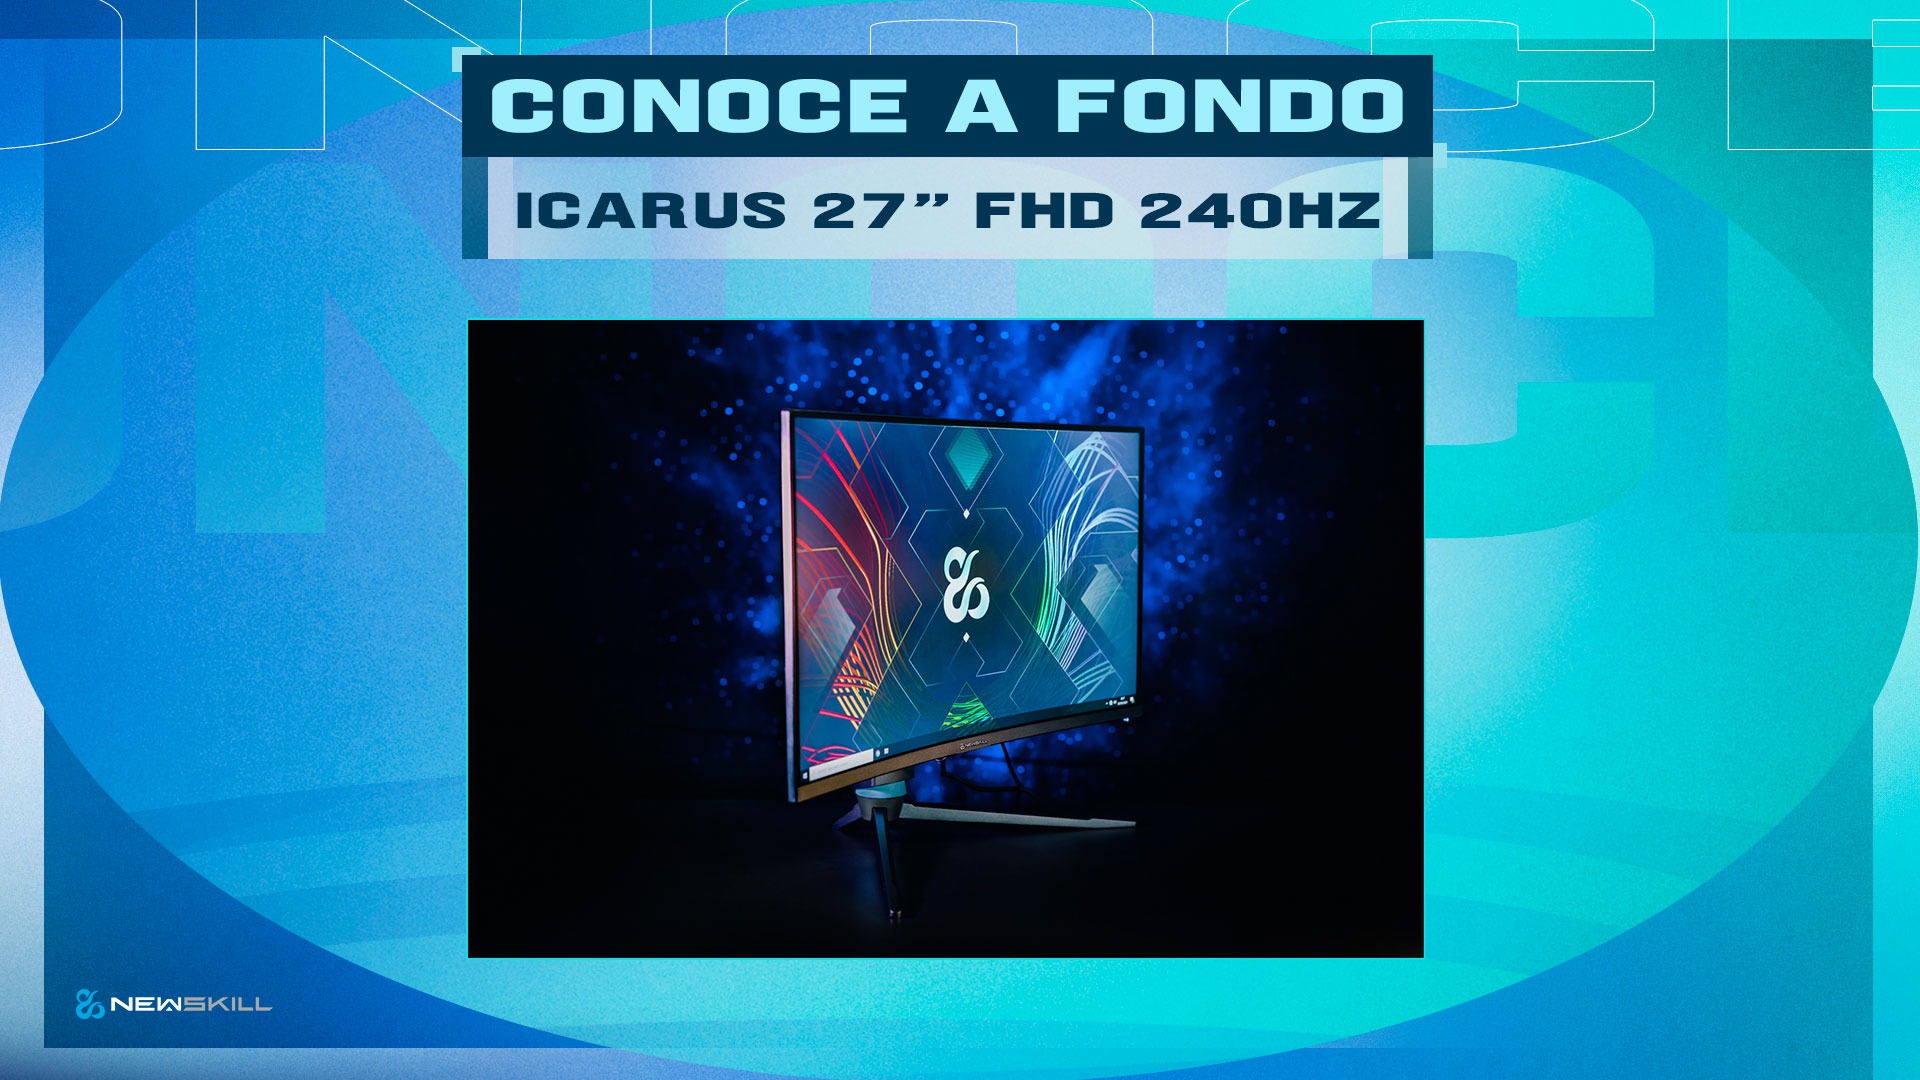 Get to know Icarus 27" FHD 240Hz in depth